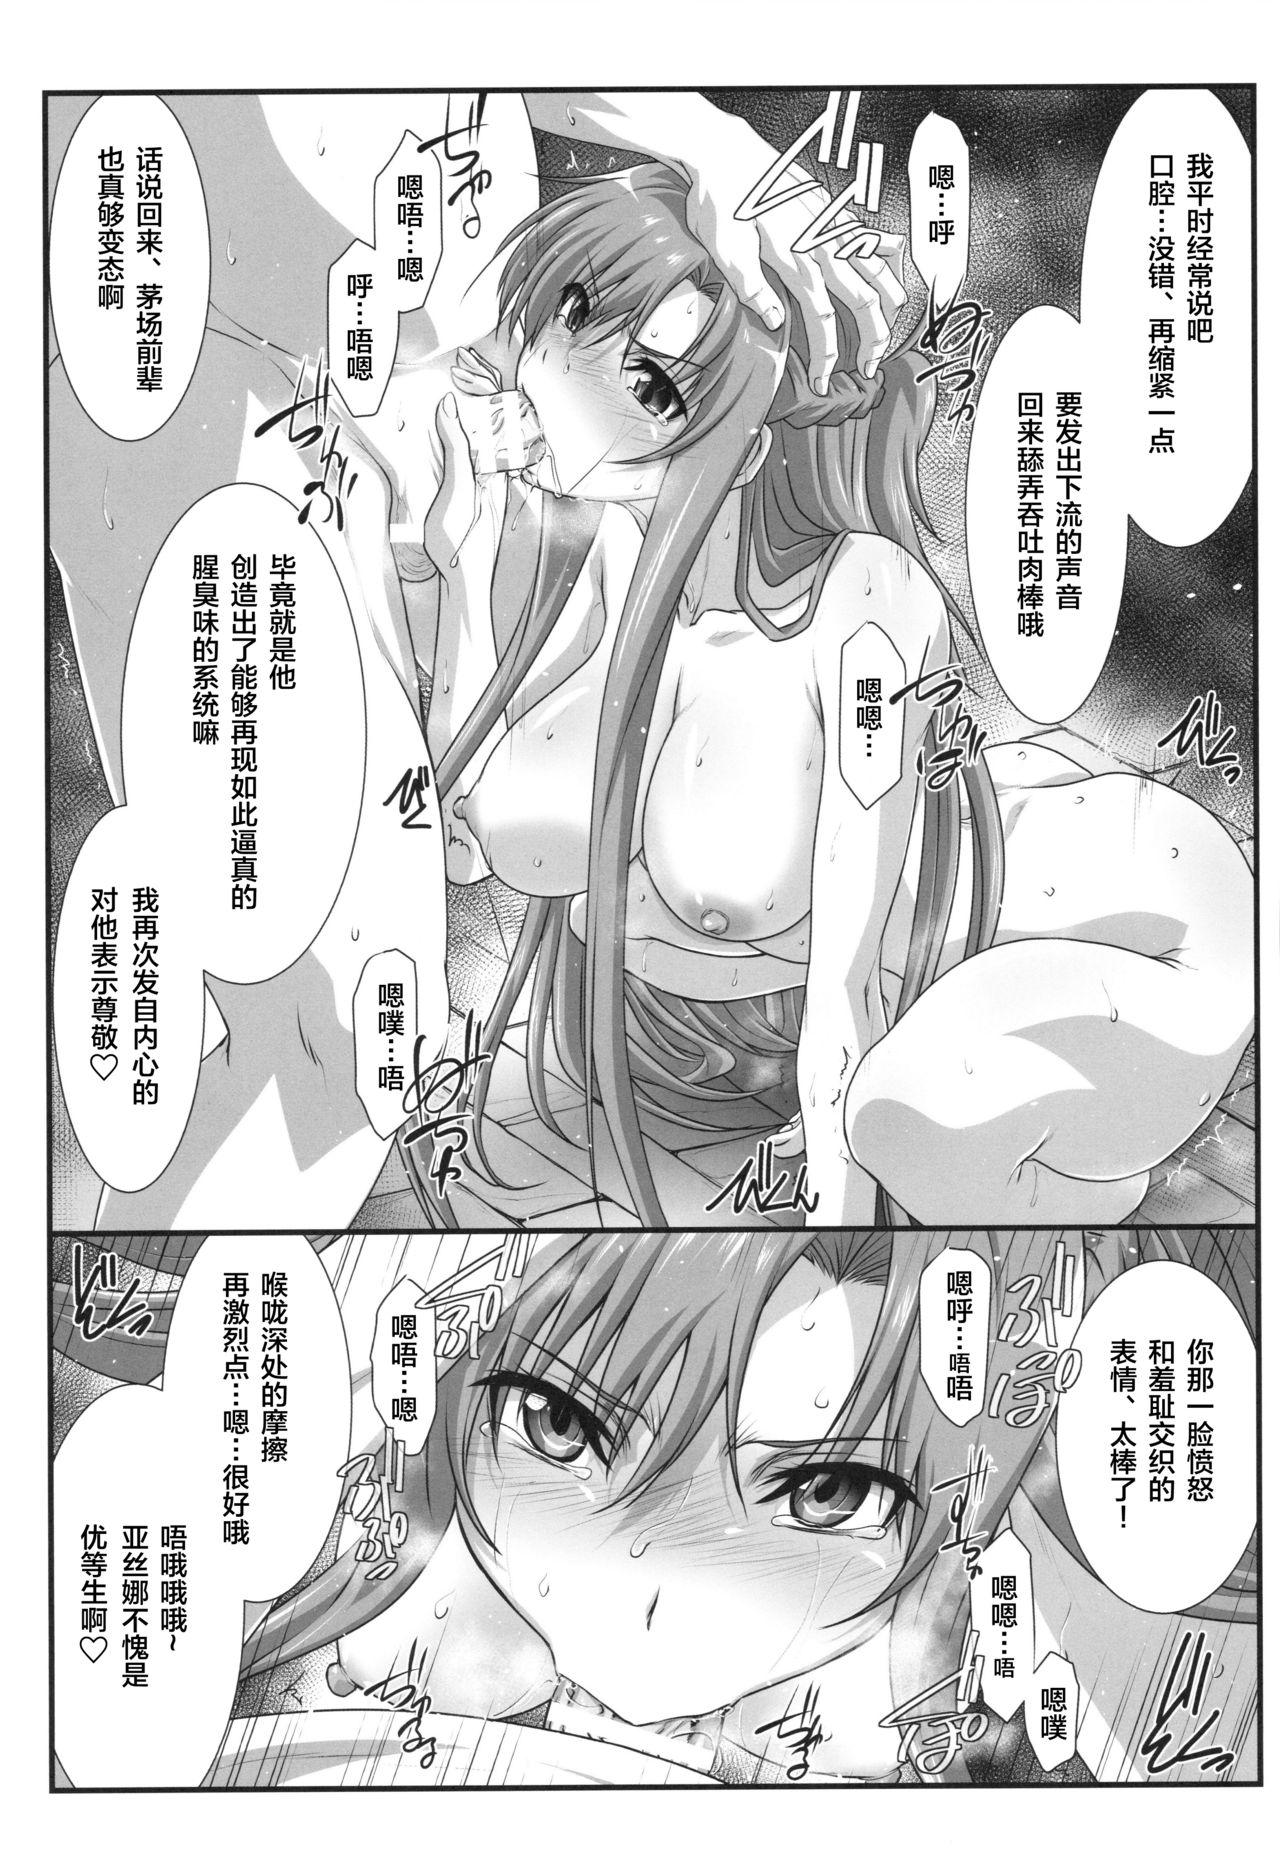 Amante Astral Bout Ver. 41 - Sword art online Roludo - Page 6